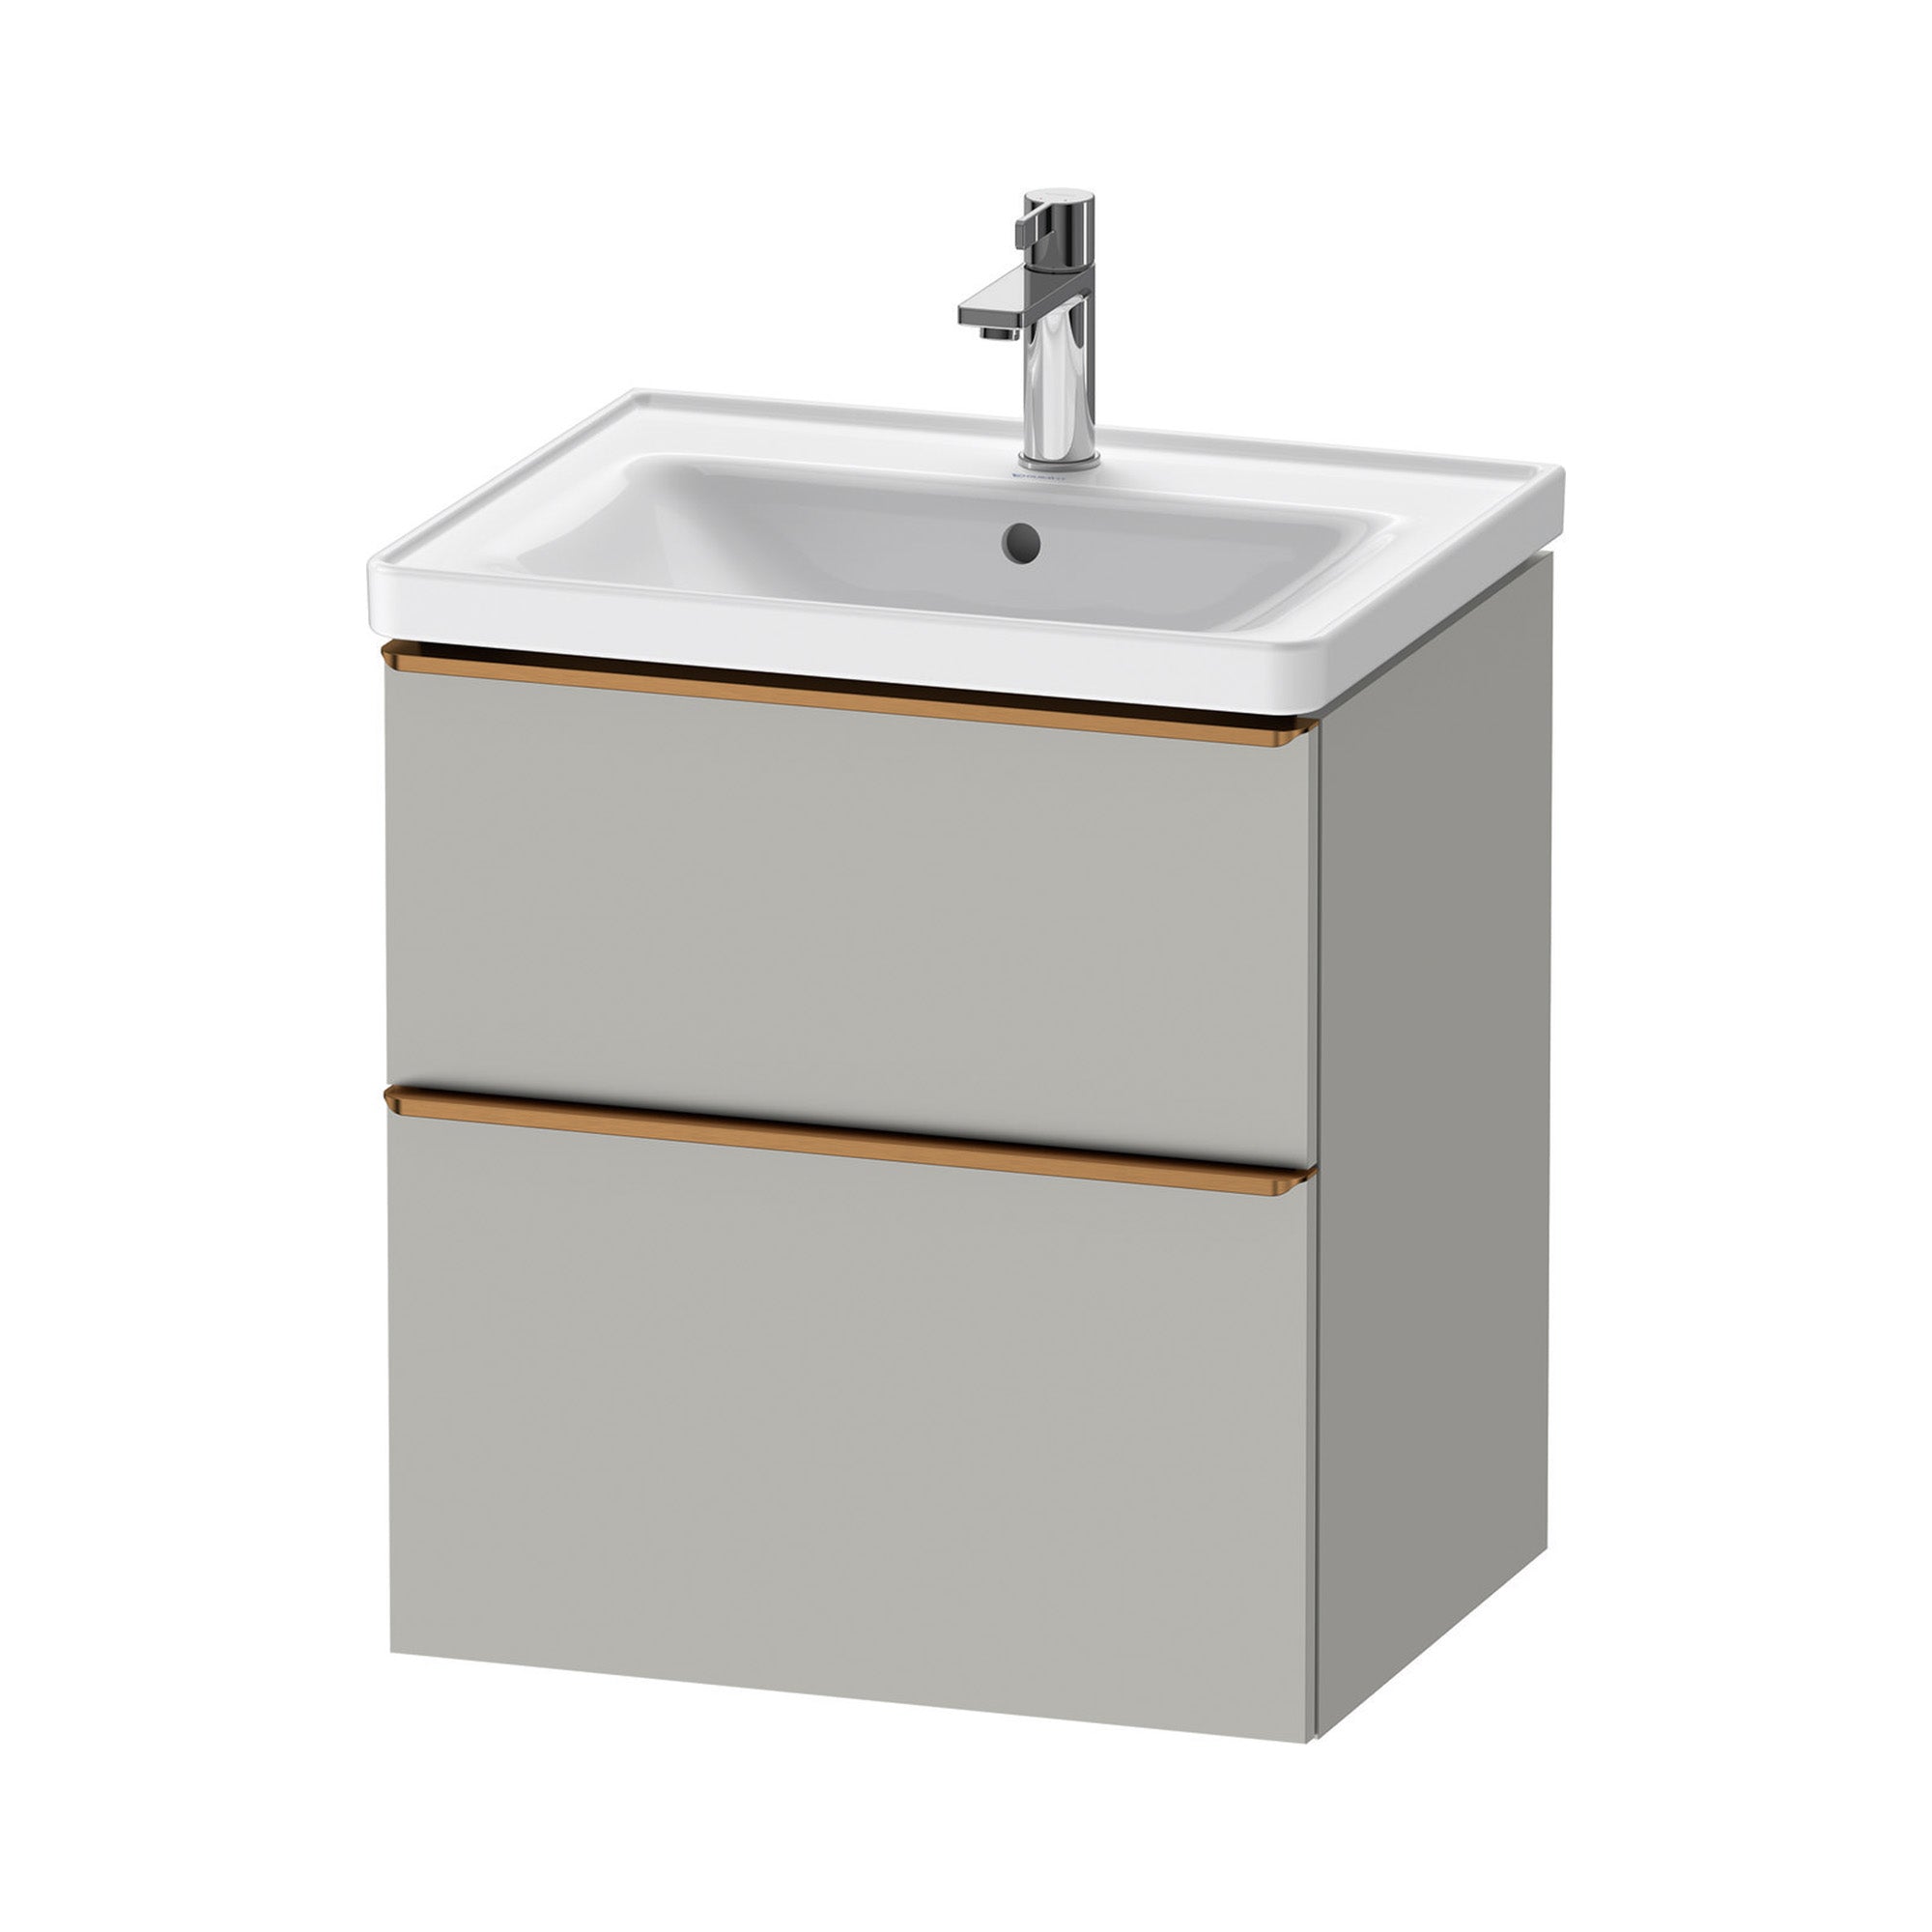 duravit d-neo 600 wall mounted vanity unit with d-neo basin concrete grey brushed bronze handles